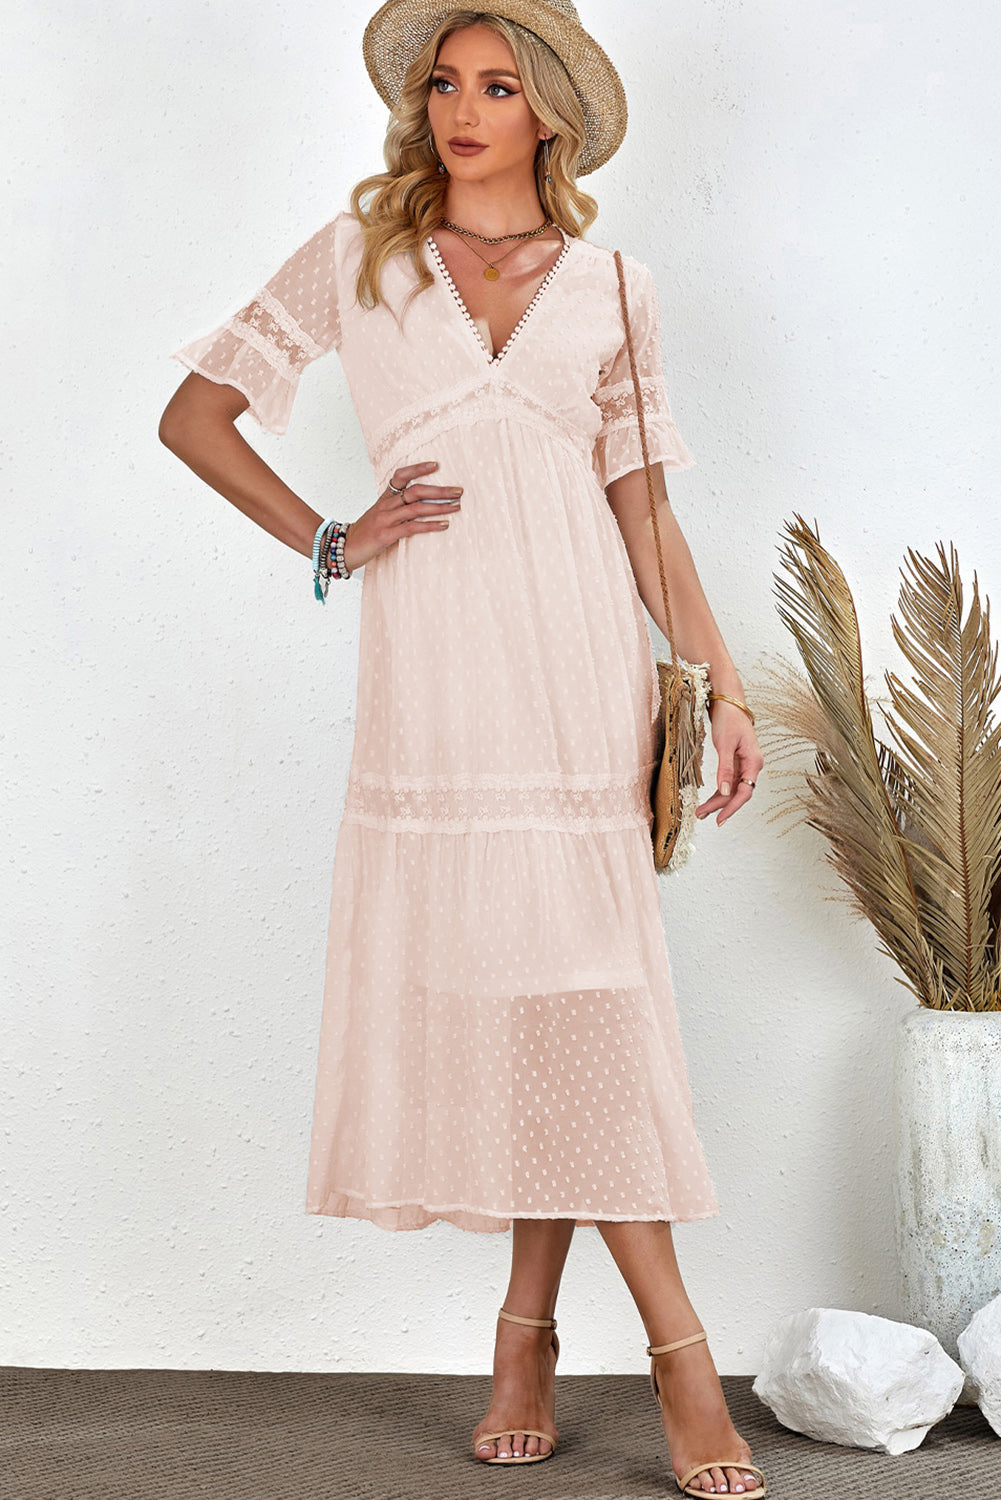 Chic Swiss Dot Midi Dress in white/peach, with a flattering V-neck and airy sleeves, perfect for summer days and elegant evenings.